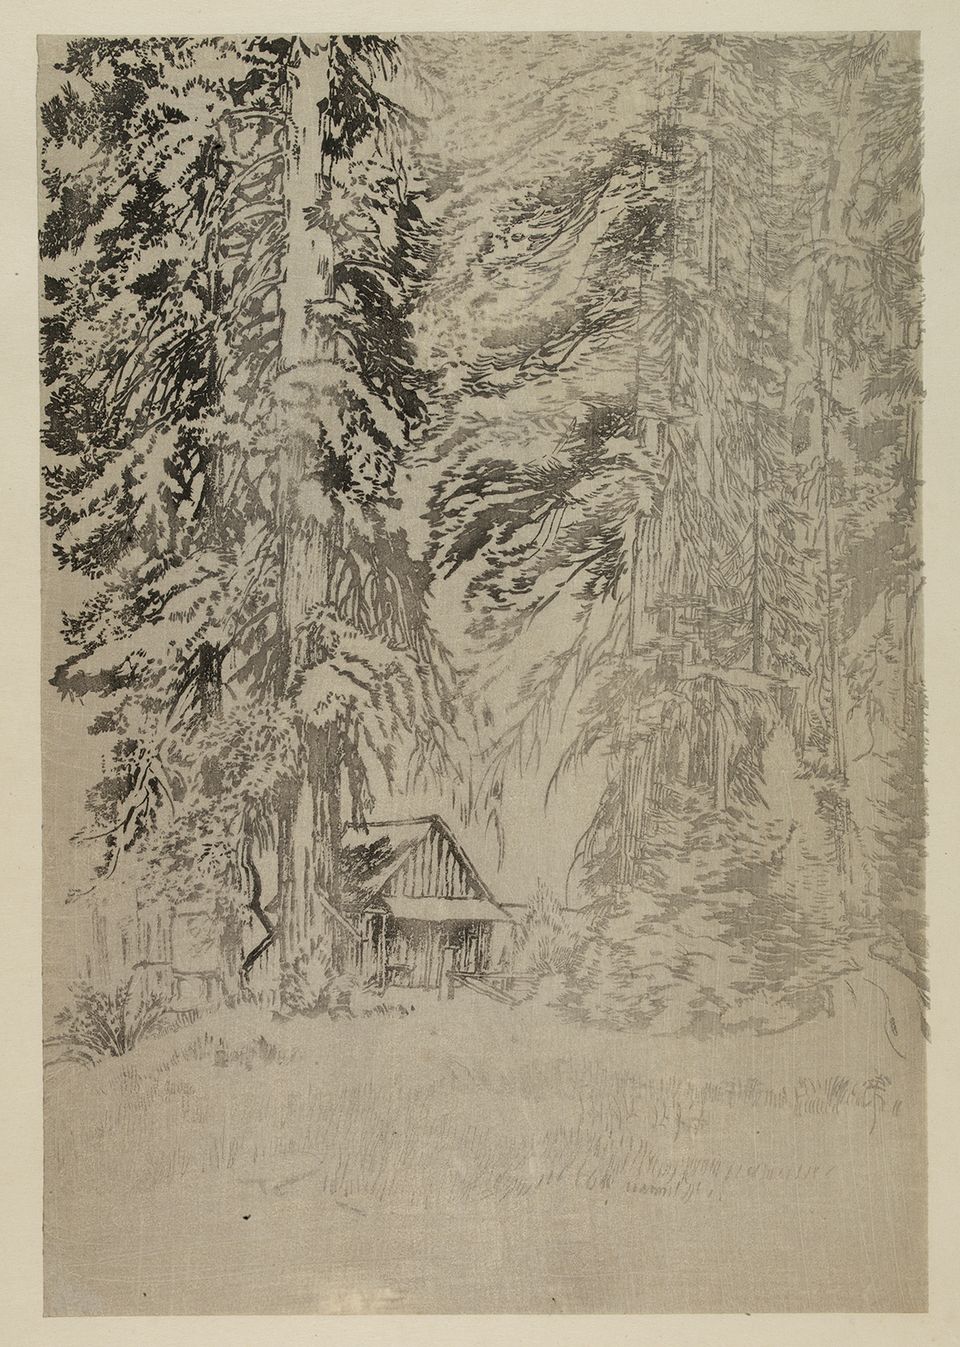 A watercolor image of a small inn surrounded by trees. 